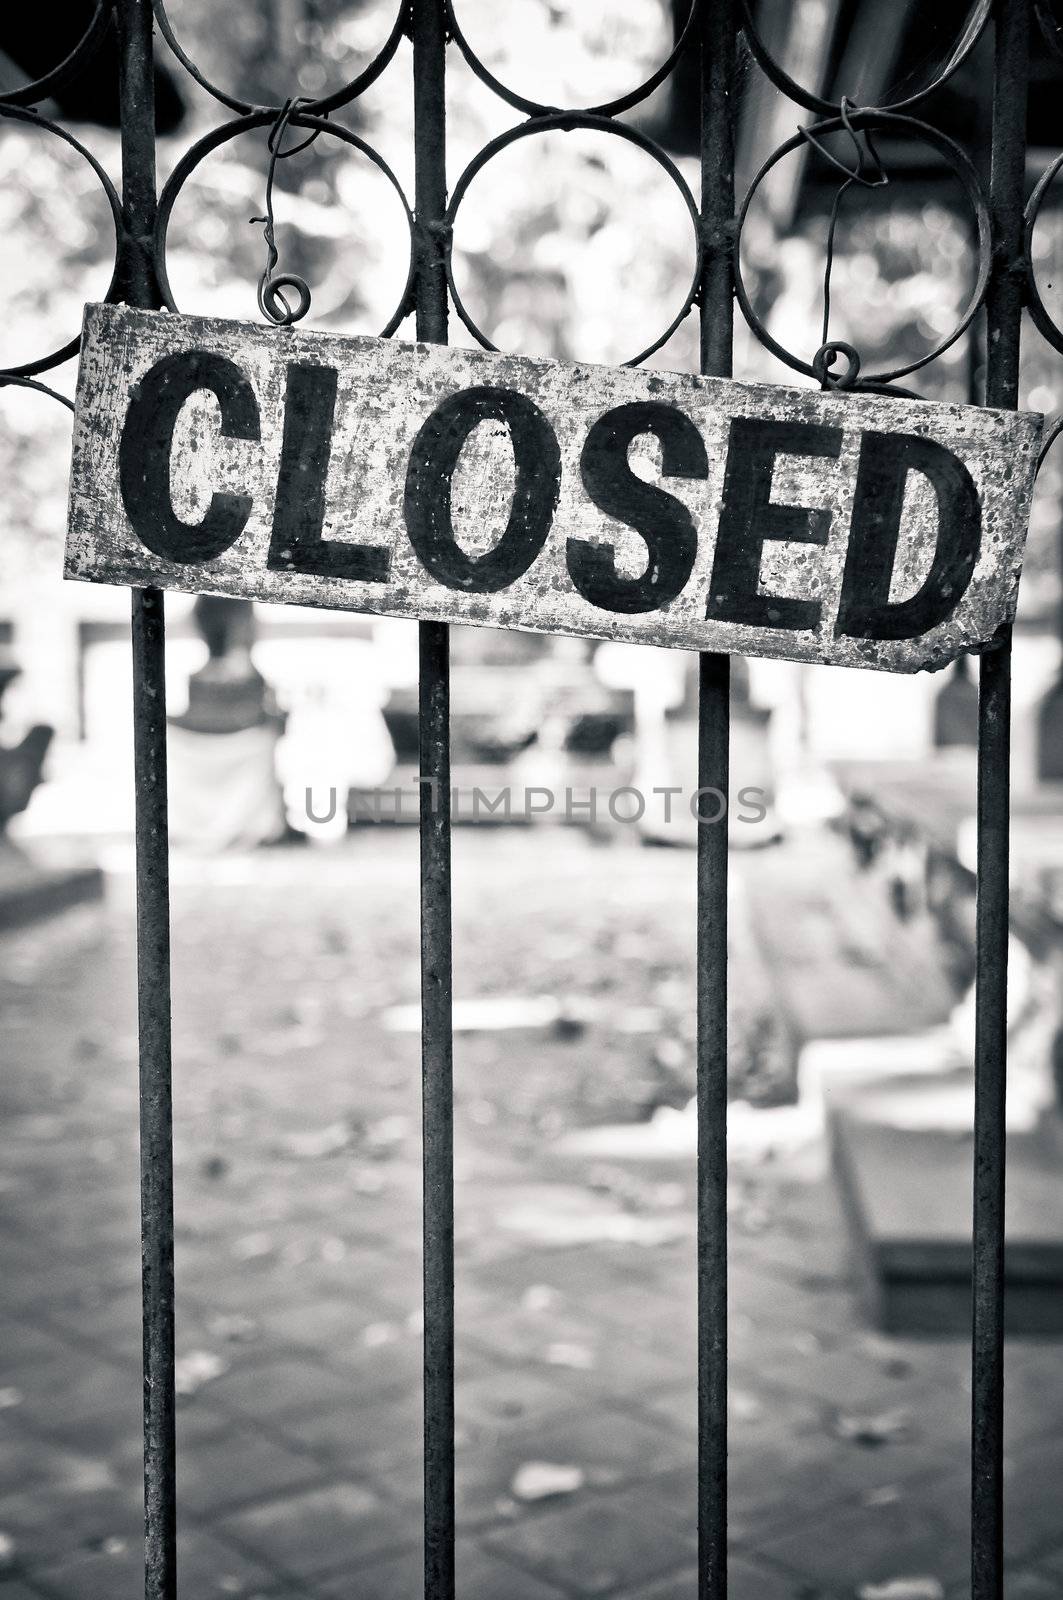 Monochrome closed sign on metal bars by martinm303